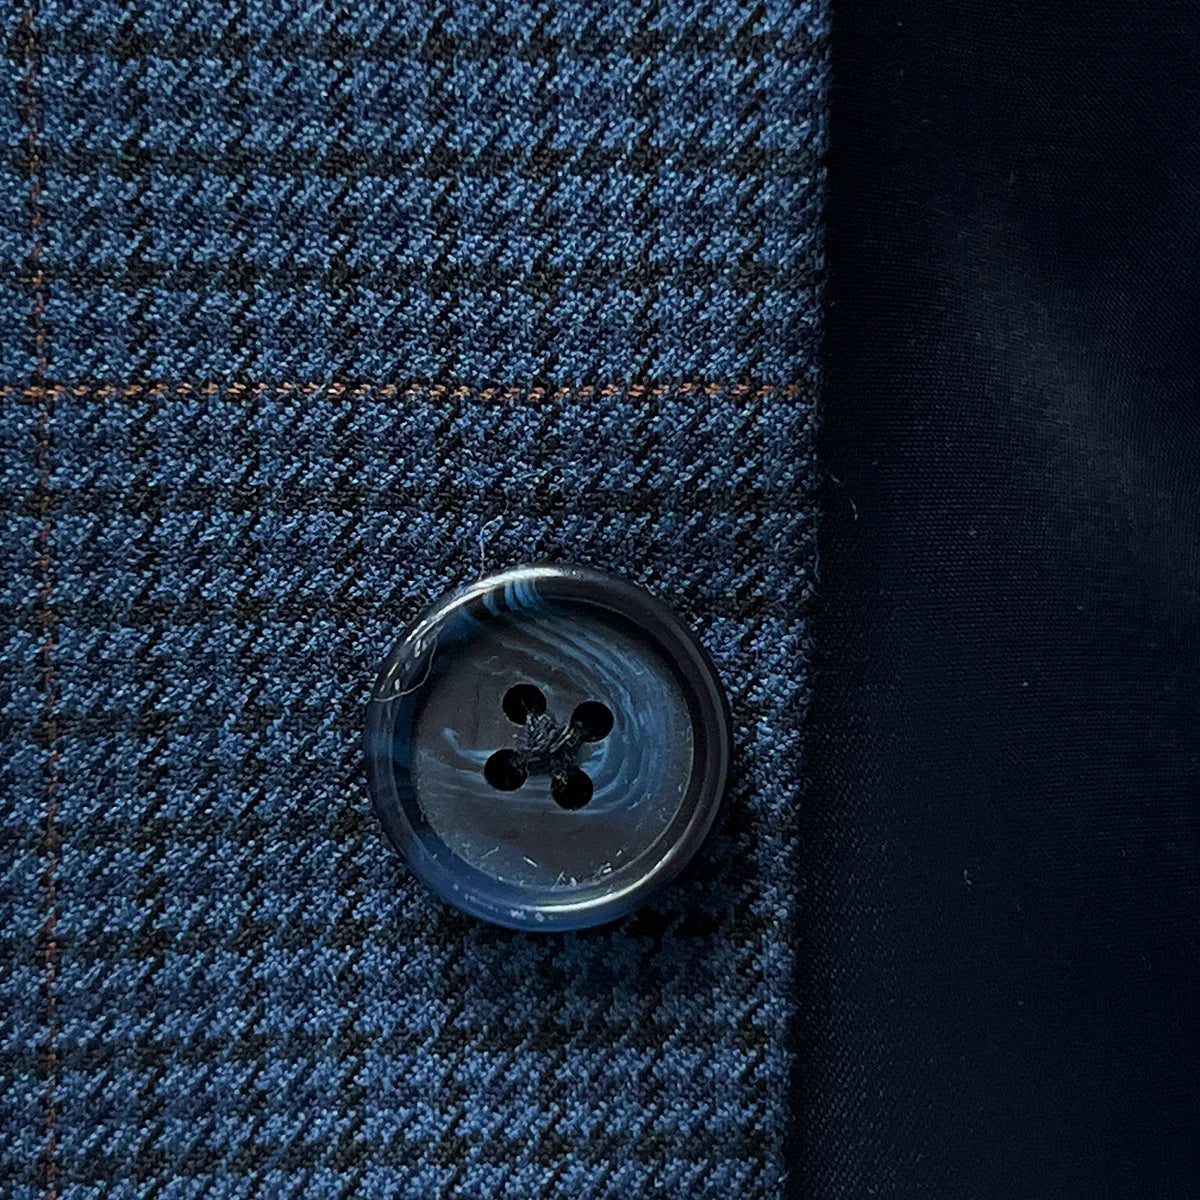 Close-up of the navy marble horn buttons on the prussian blue suit jacket, highlighting their unique texture and color.